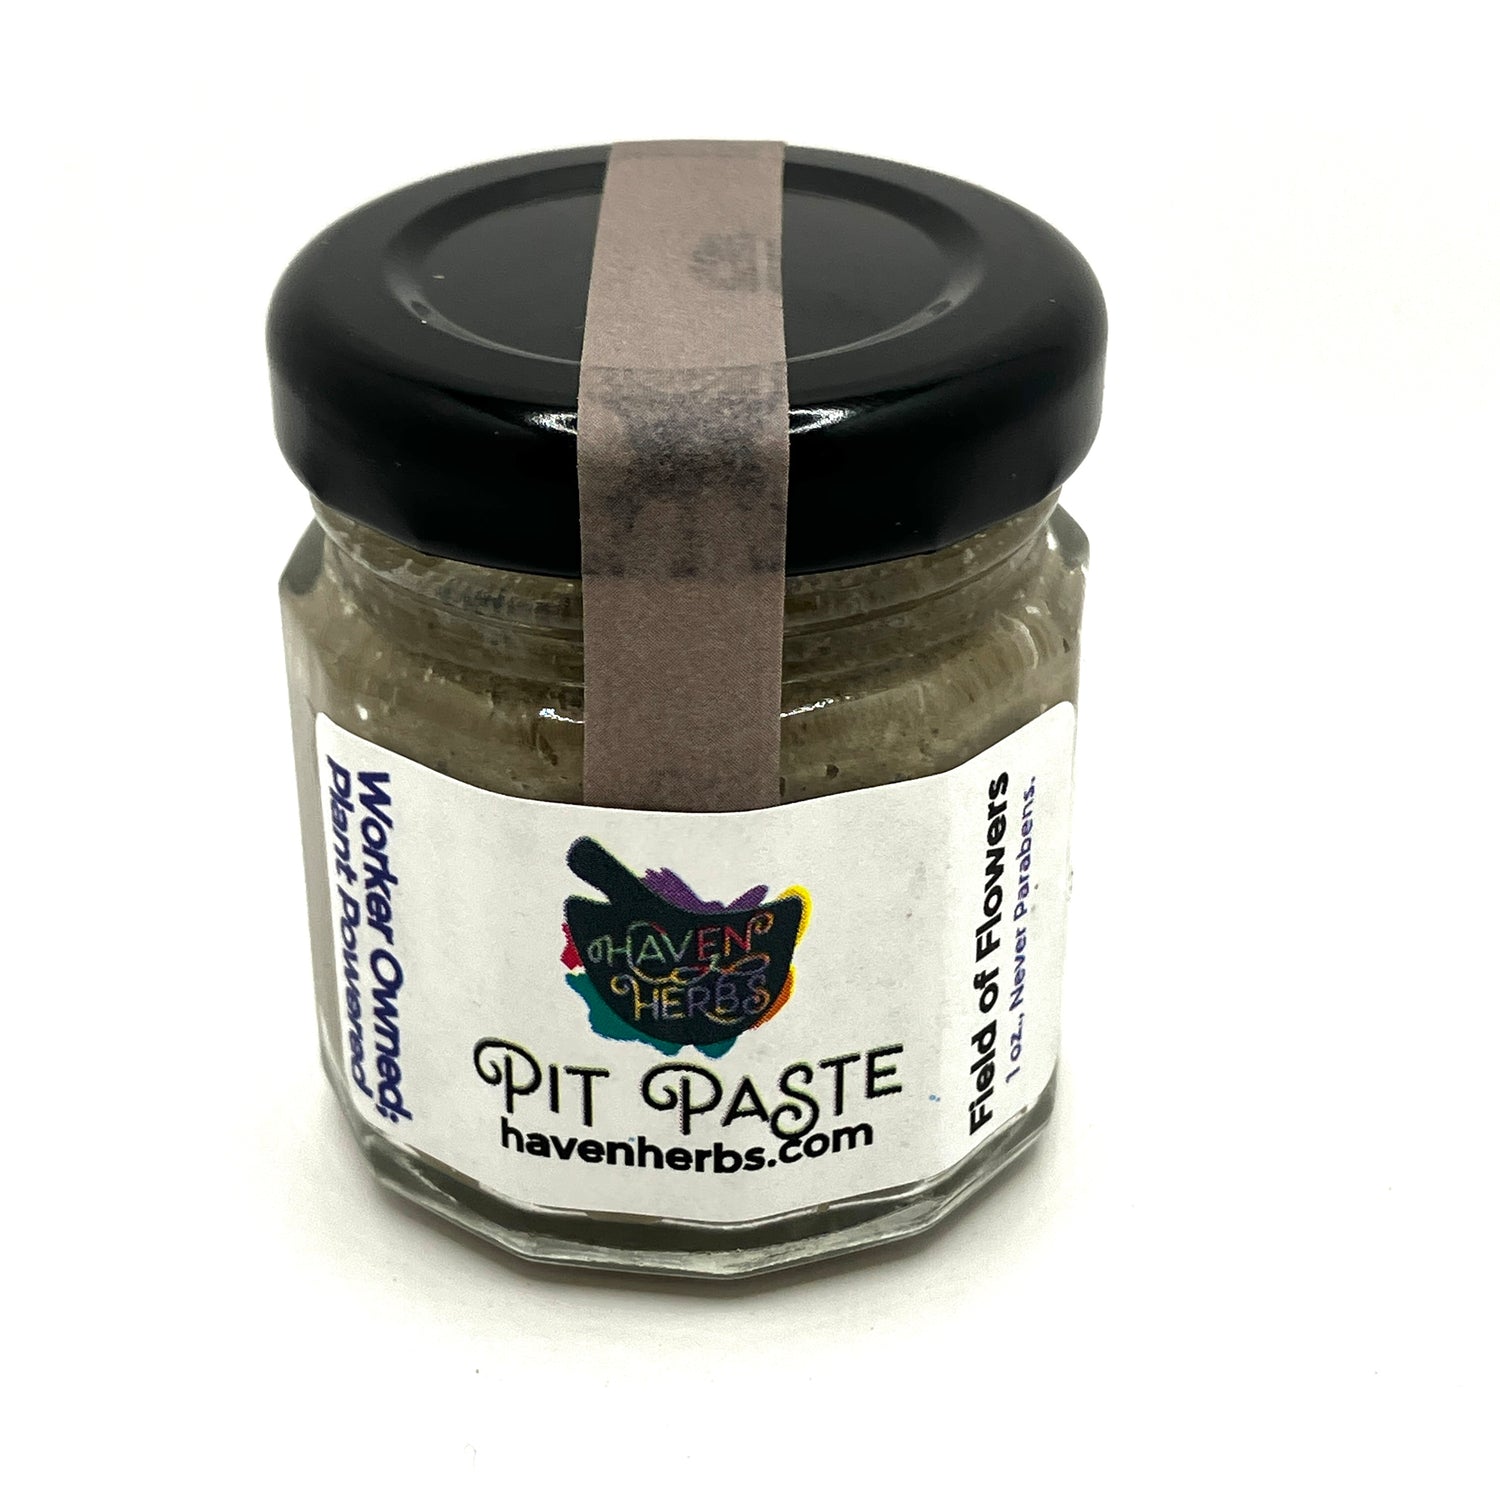 Pit Paste by Haven Herbs. Field of Flowers scent.